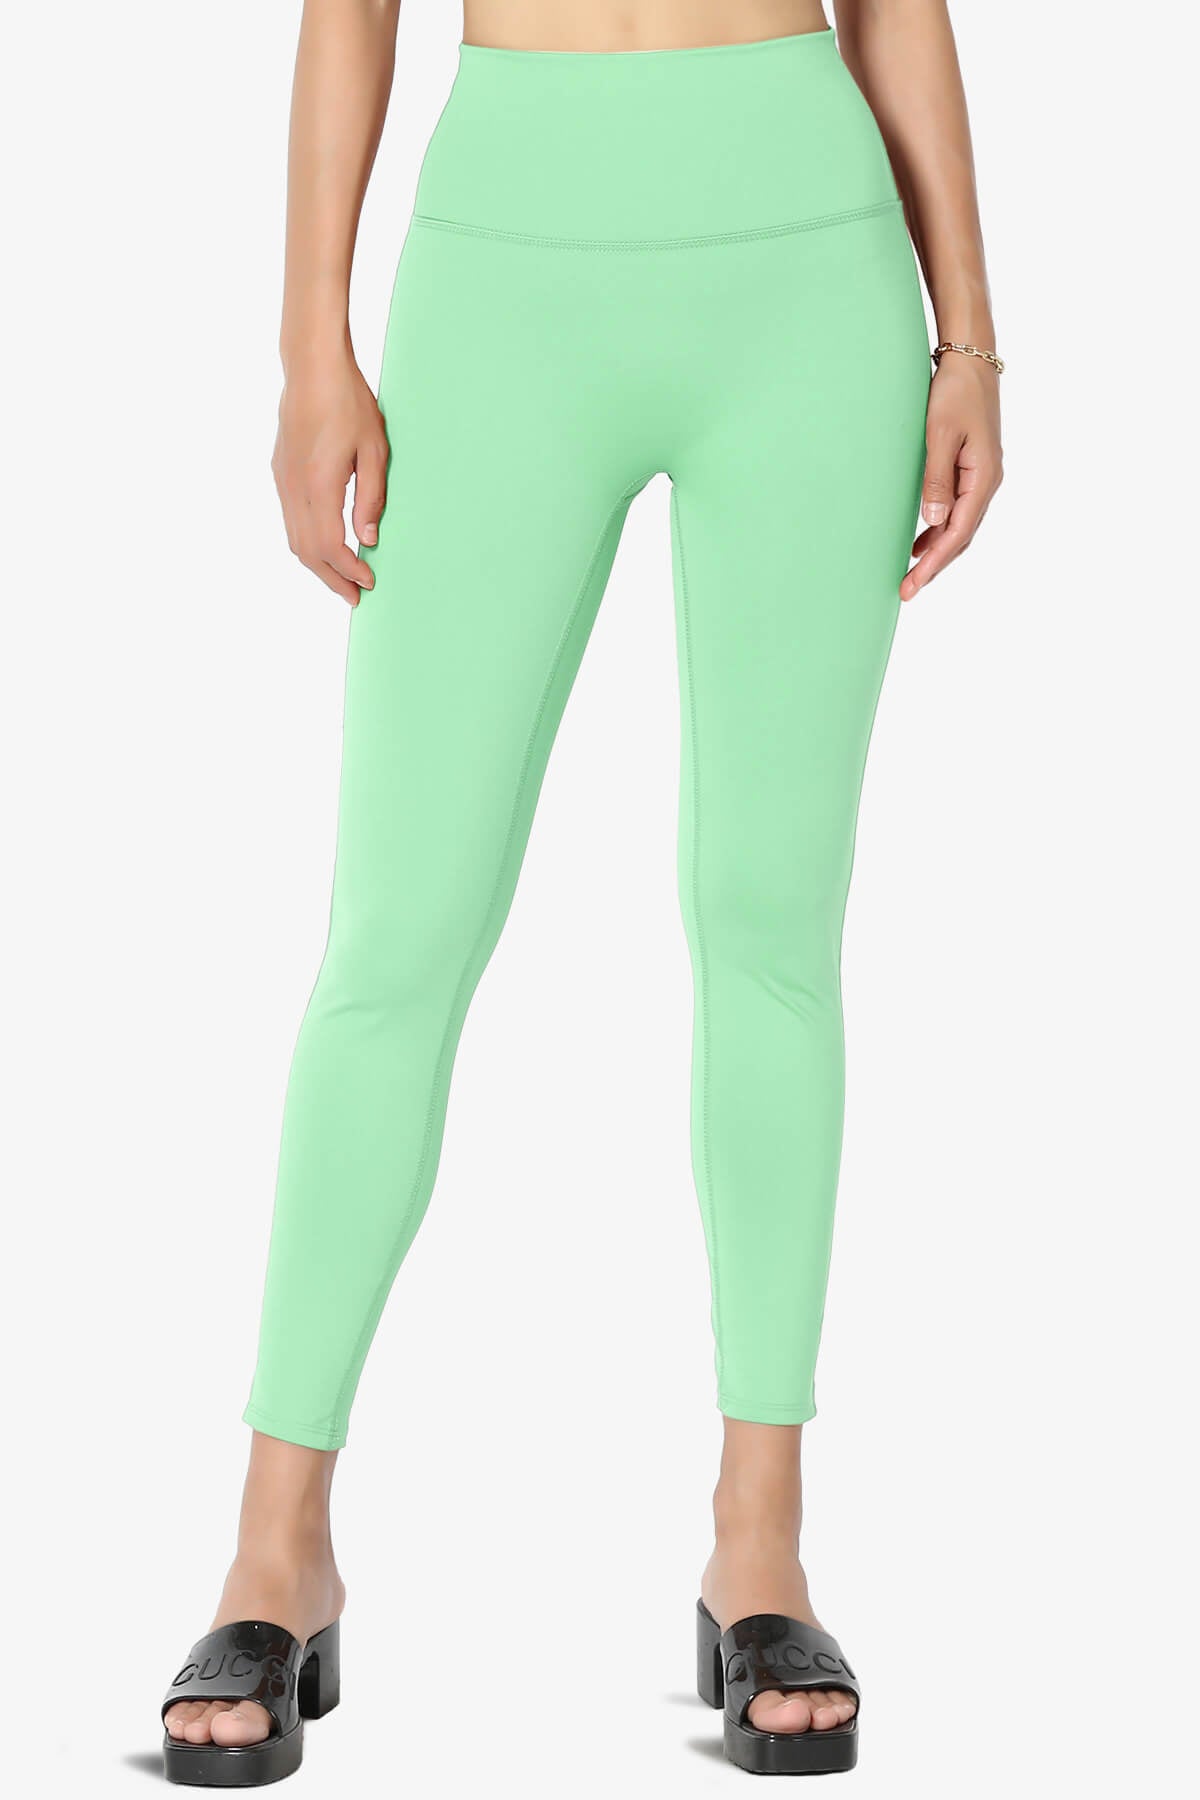 Mosco Athletic Tummy Control Workout Leggings GREEN MINT_2